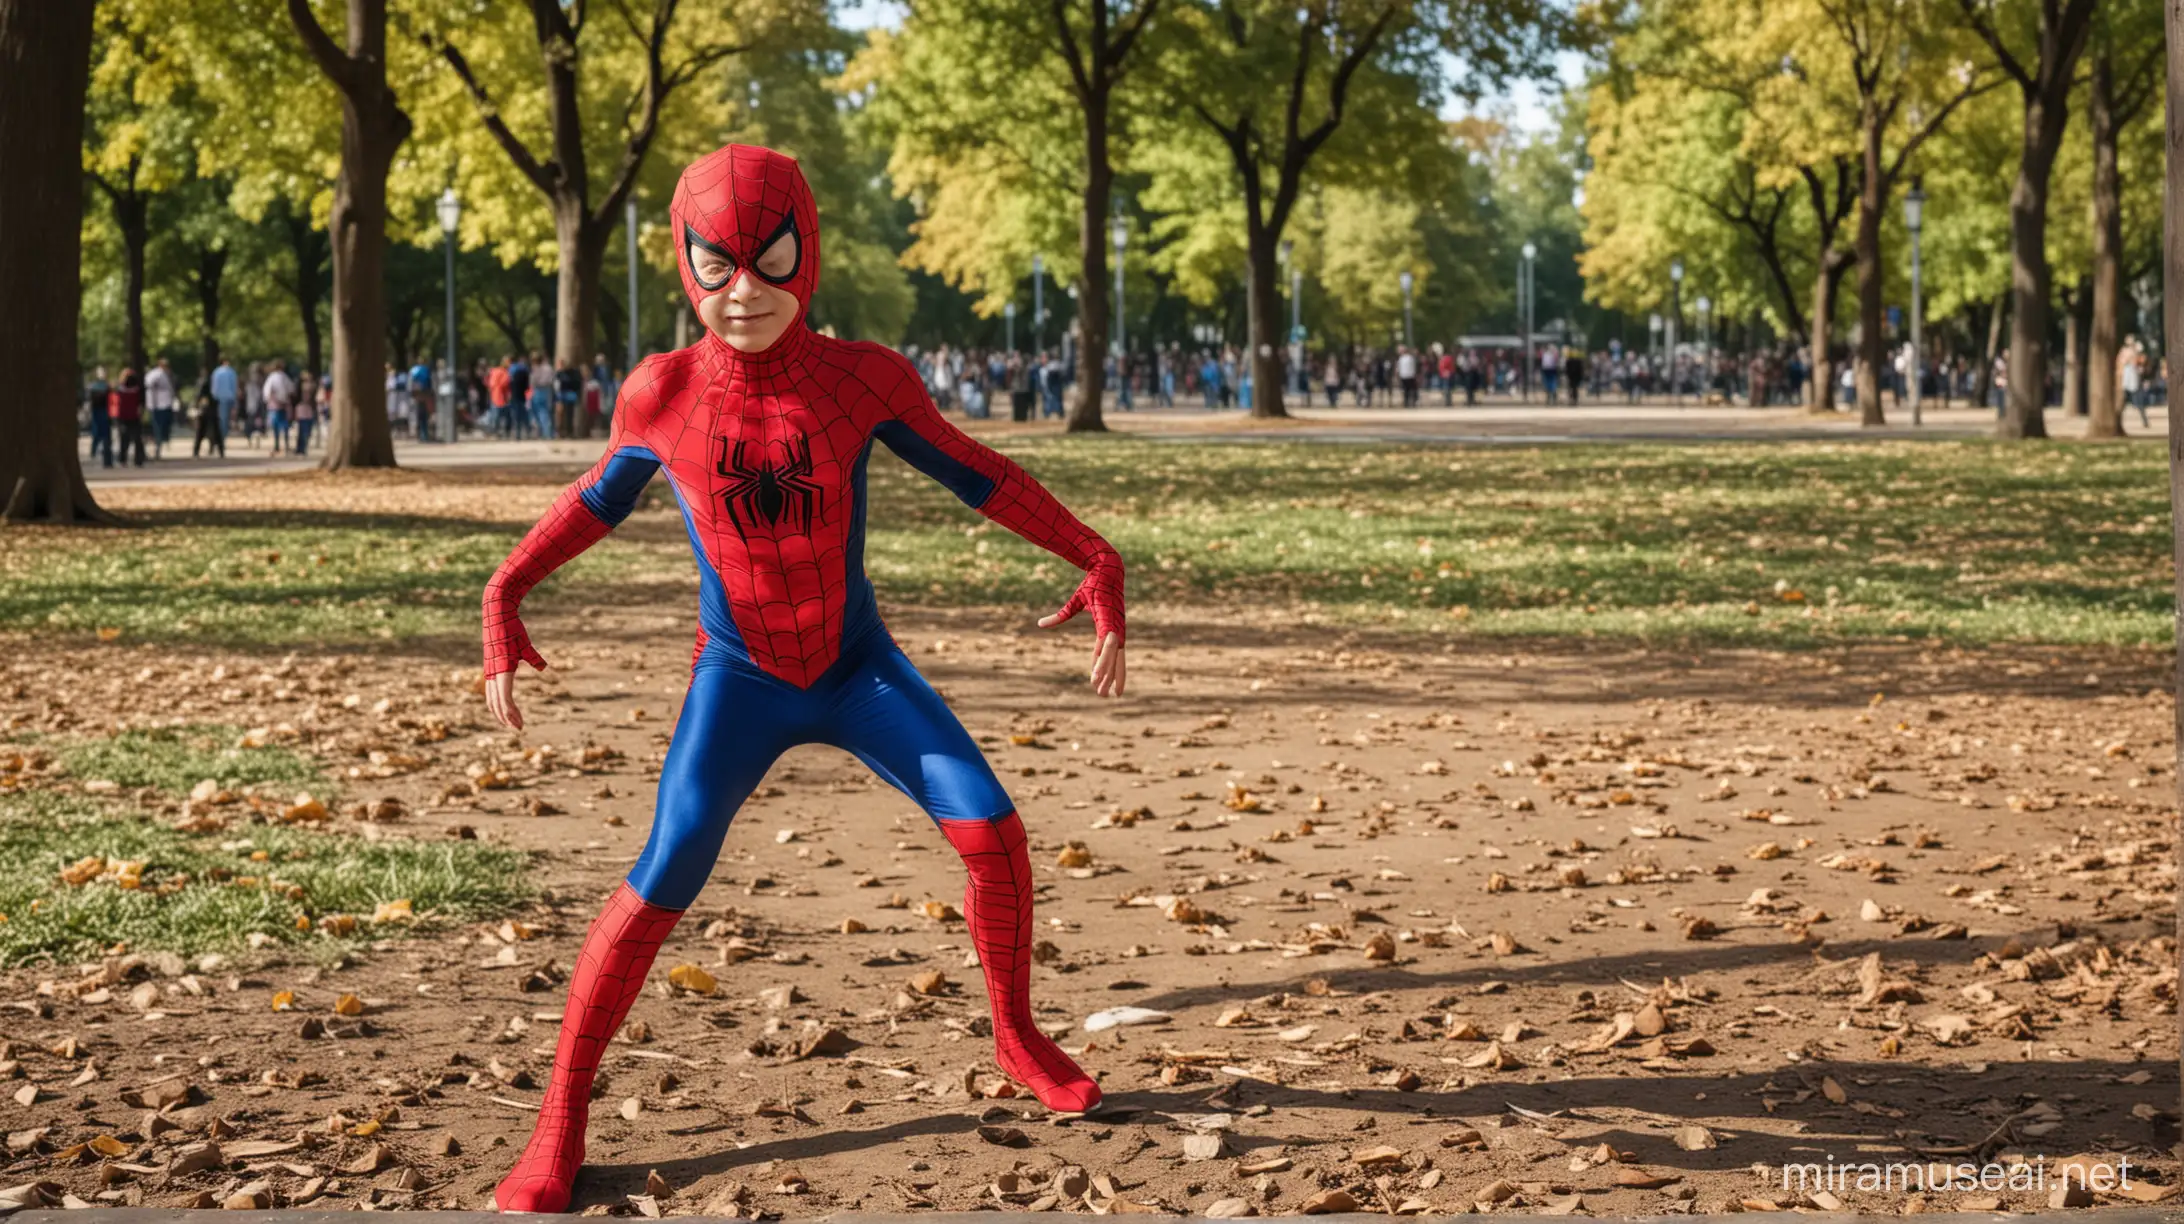 A kids play in park,spiderman dress